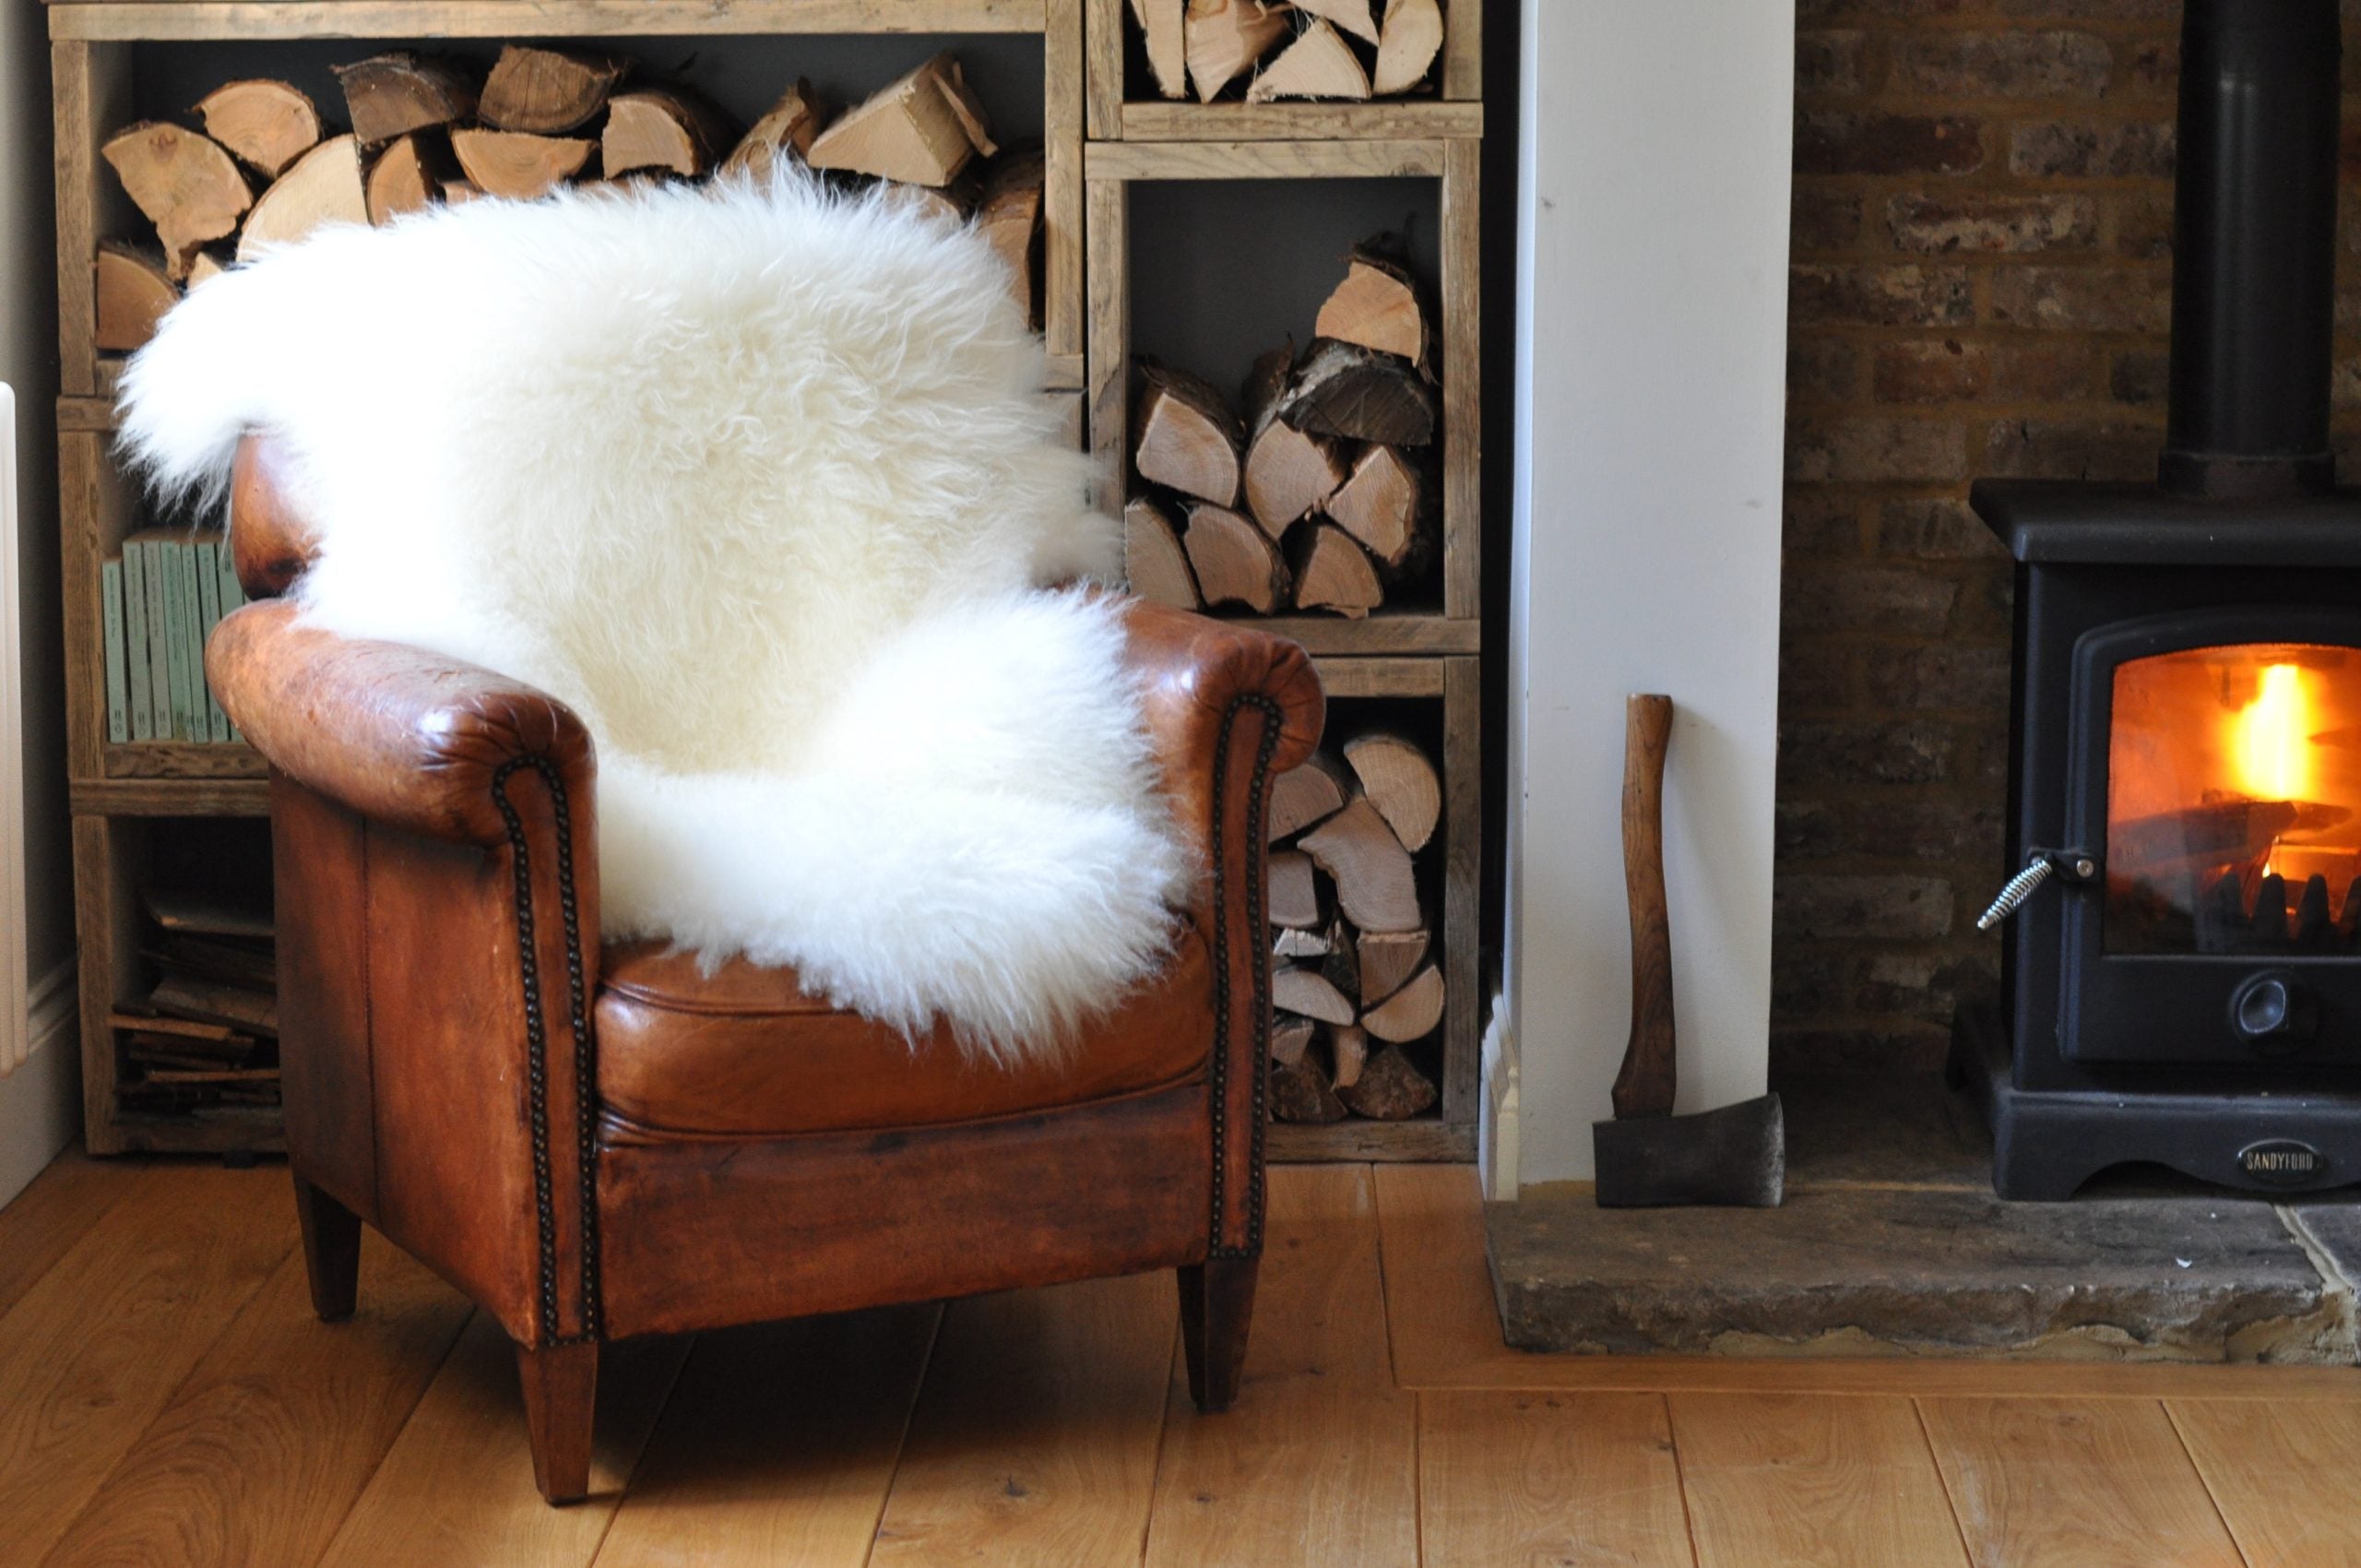 New Season At Home Barn Home barn Leather Chair Storage and Icelandic Rugs